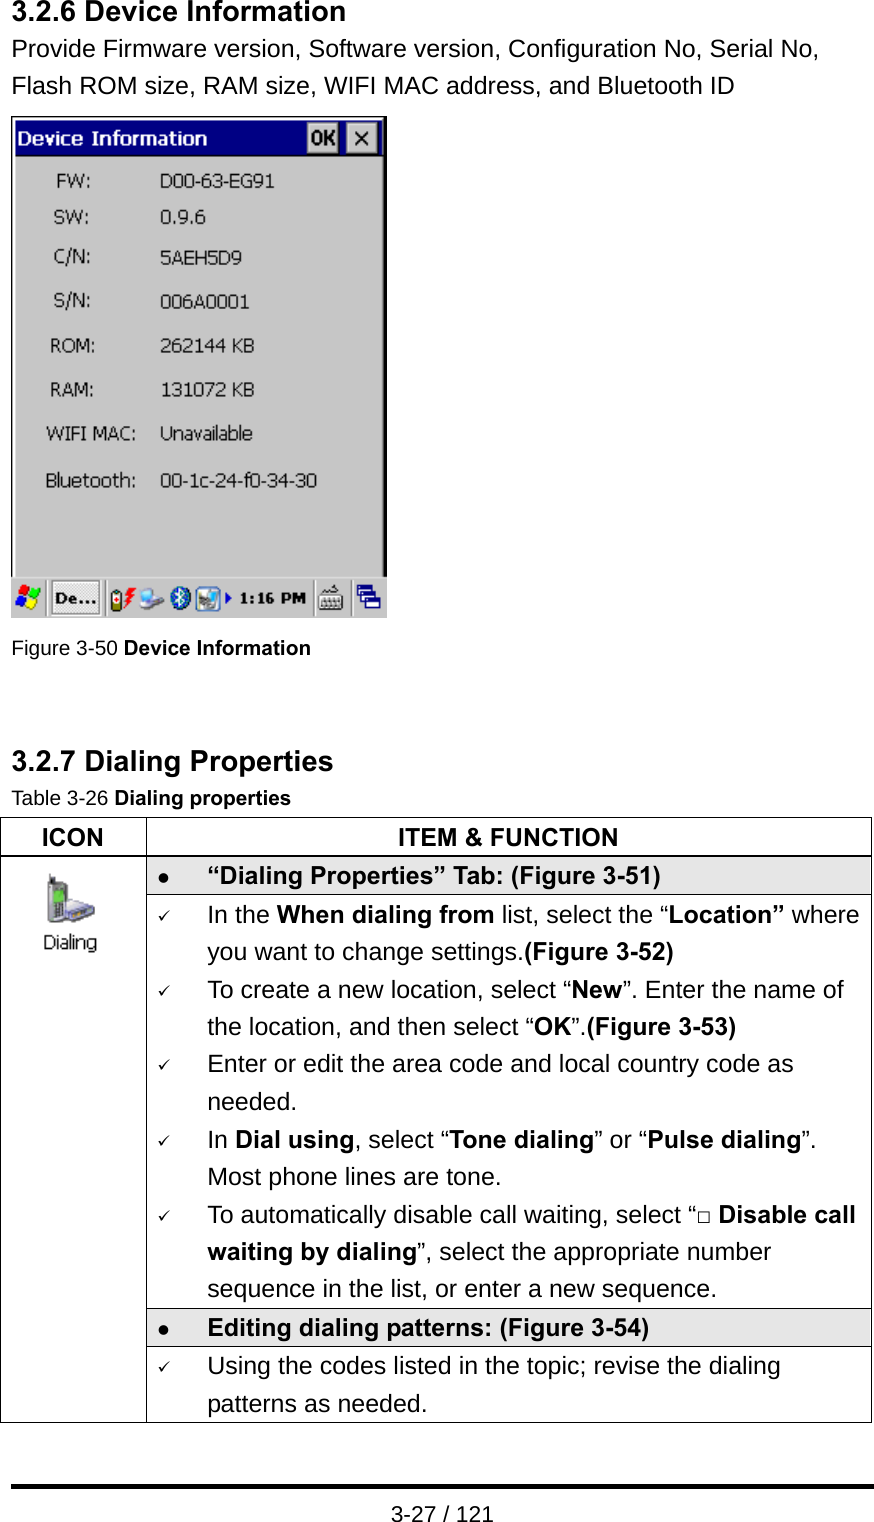  3-27 / 121 3.2.6 Device Information Provide Firmware version, Software version, Configuration No, Serial No, Flash ROM size, RAM size, WIFI MAC address, and Bluetooth ID  Figure 3-50 Device Information   3.2.7 Dialing Properties Table 3-26 Dialing properties ICON  ITEM &amp; FUNCTION z “Dialing Properties” Tab: (Figure 3-51) 9 In the When dialing from list, select the “Location” where you want to change settings.(Figure 3-52) 9 To create a new location, select “New”. Enter the name of the location, and then select “OK”.(Figure 3-53) 9 Enter or edit the area code and local country code as needed. 9 In Dial using, select “Tone dialing” or “Pulse dialing”. Most phone lines are tone. 9 To automatically disable call waiting, select “□ Disable call waiting by dialing”, select the appropriate number sequence in the list, or enter a new sequence. z Editing dialing patterns: (Figure 3-54)              9 Using the codes listed in the topic; revise the dialing patterns as needed. 